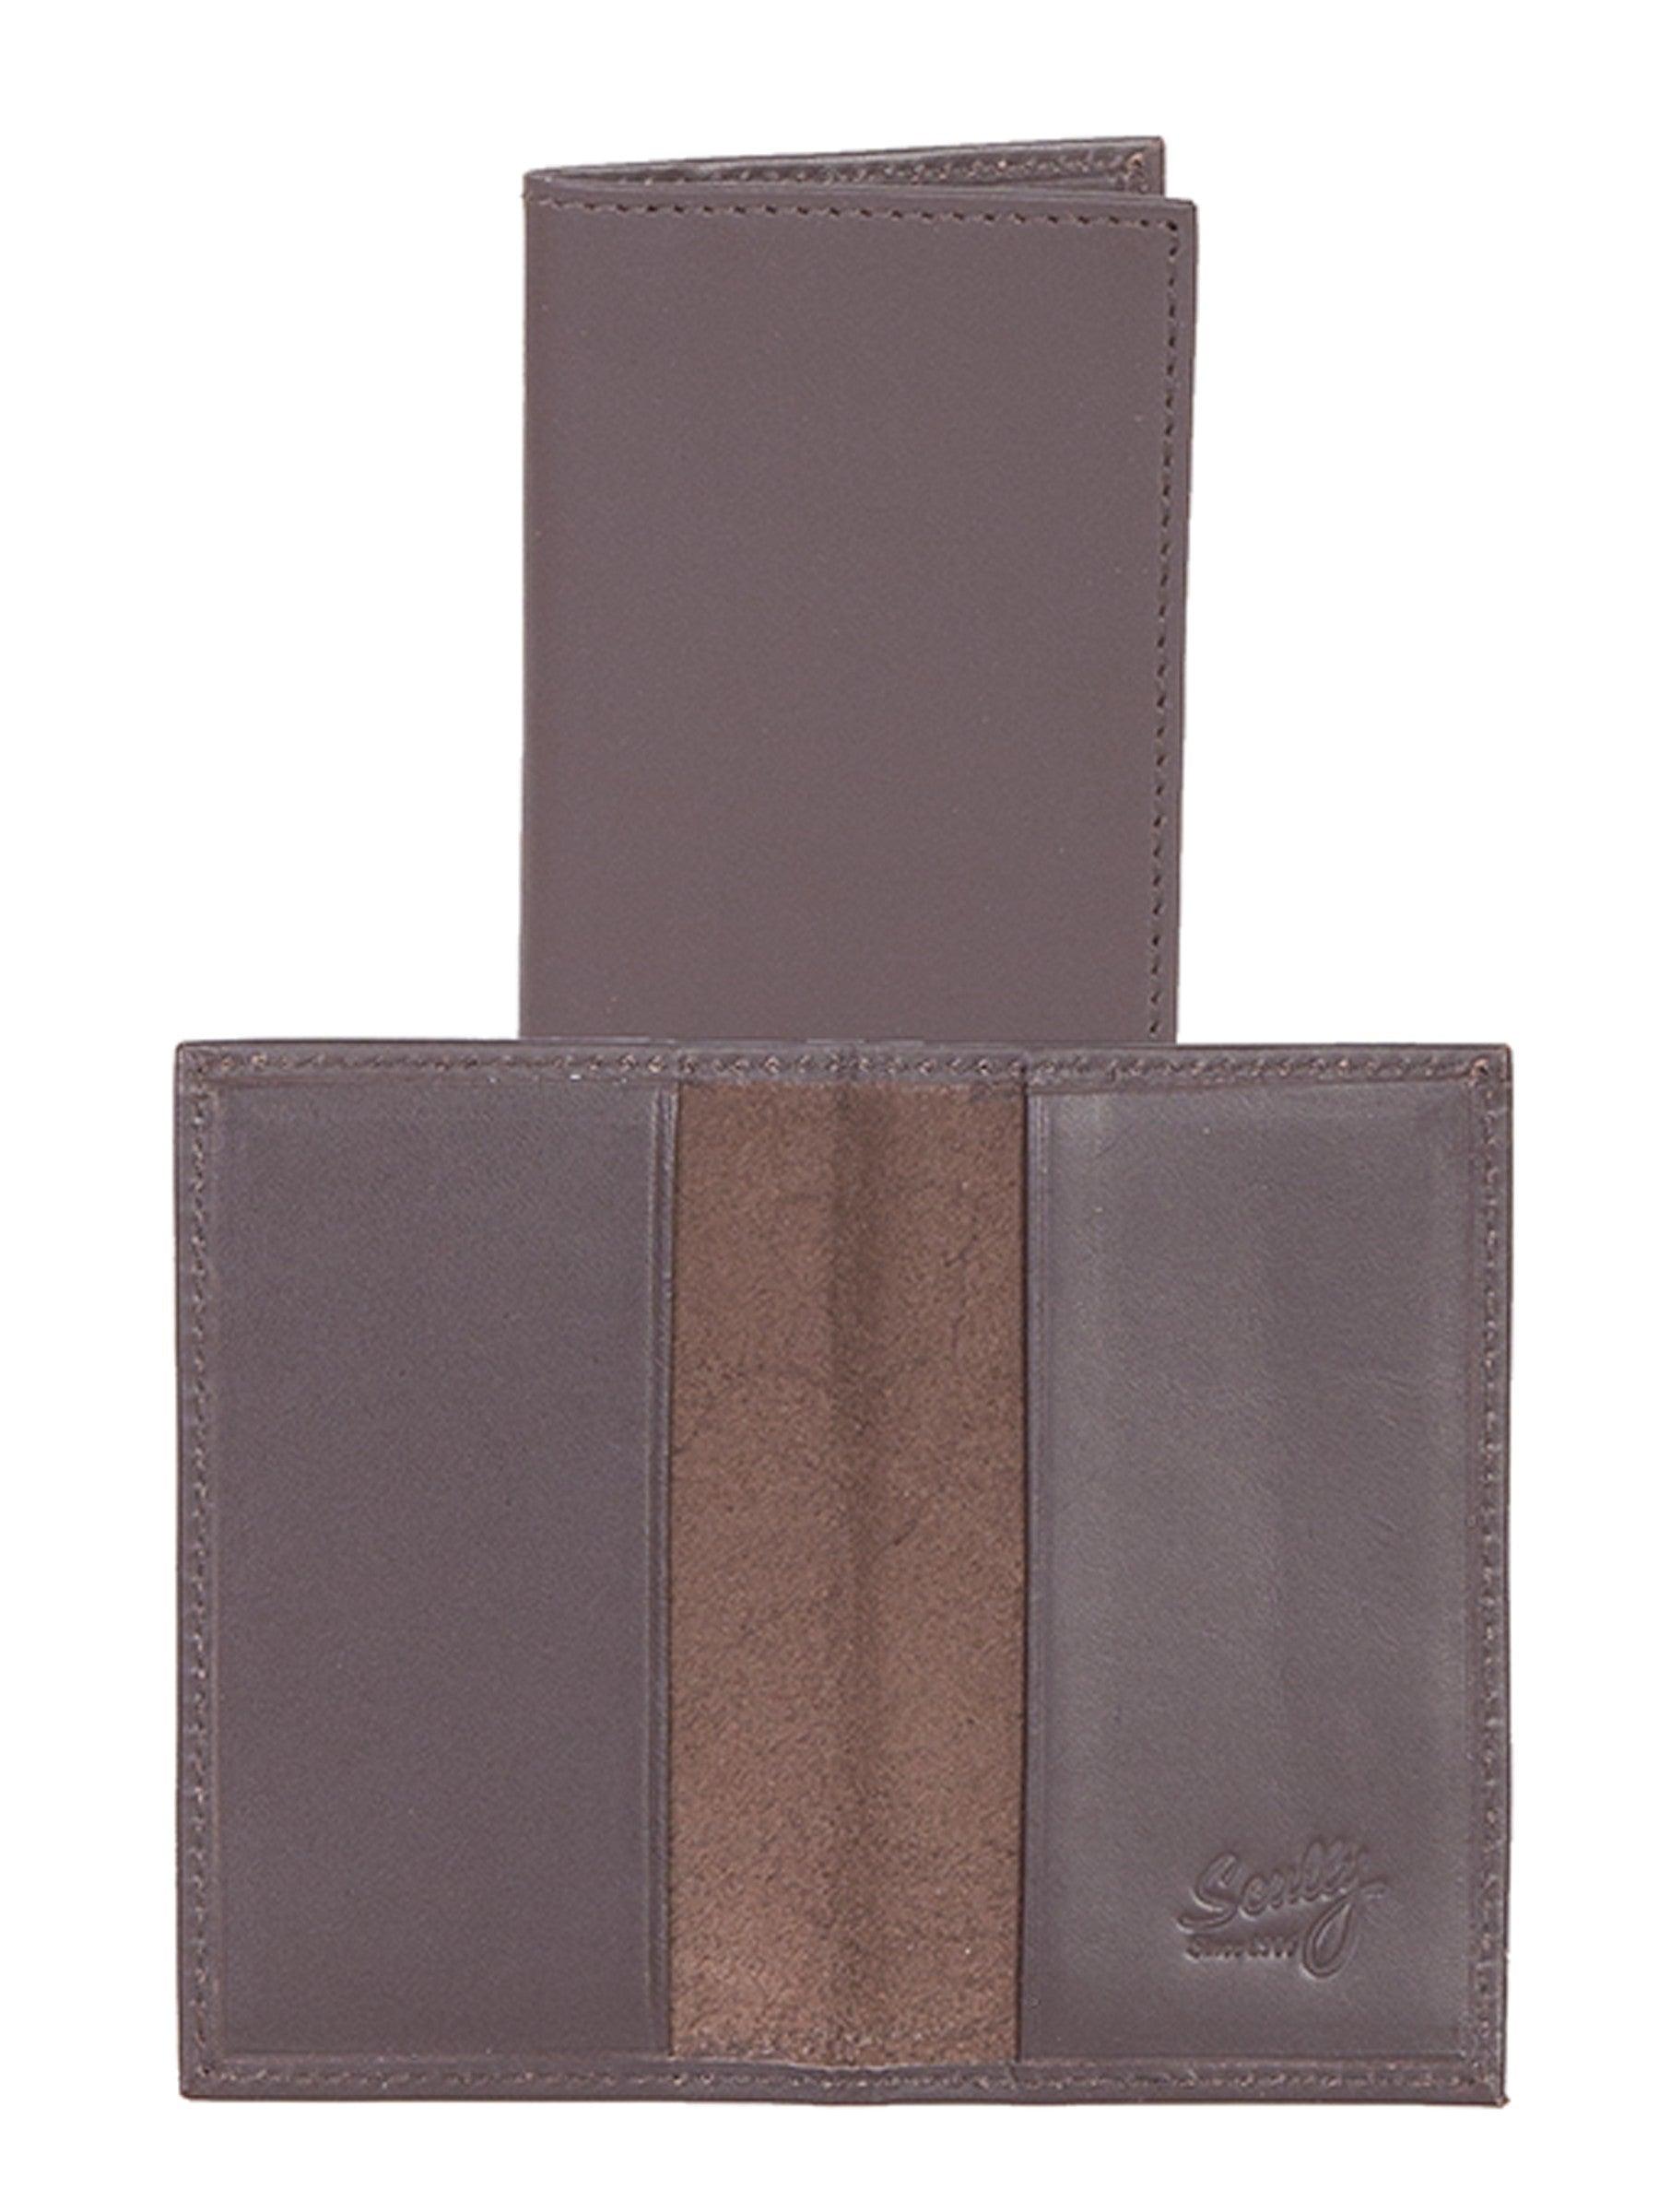 Scully Leather business card case